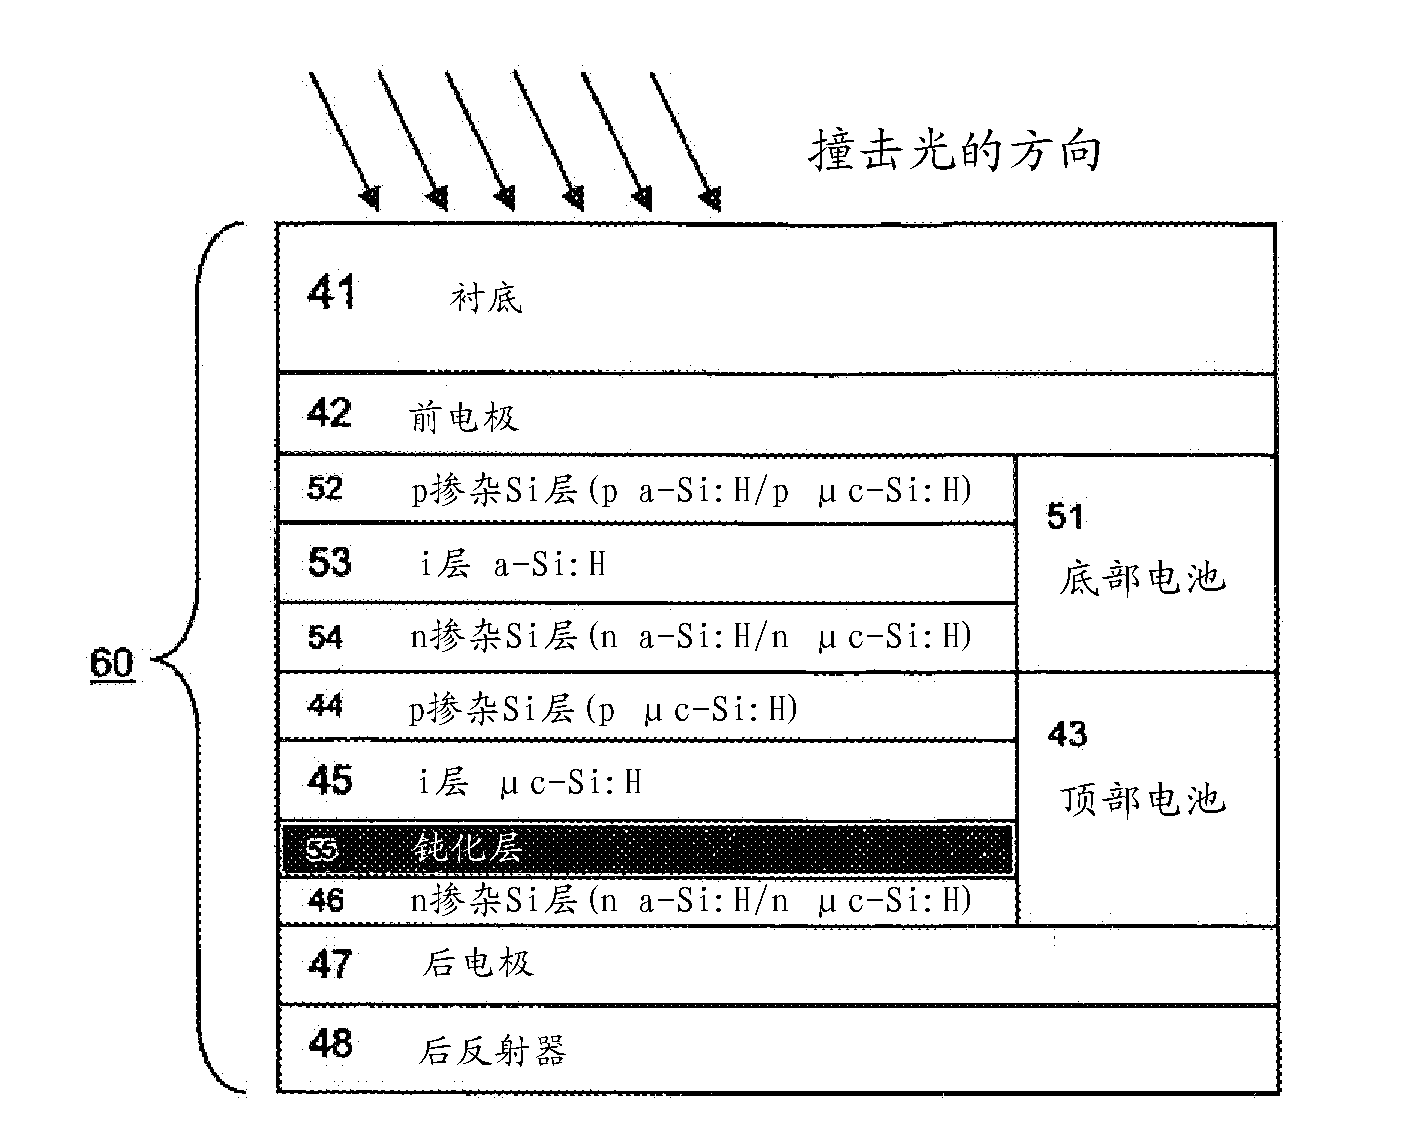 Thin film solar cell with microcrystalline absorpber layer and passivation layer and method for manufacturing such a cell